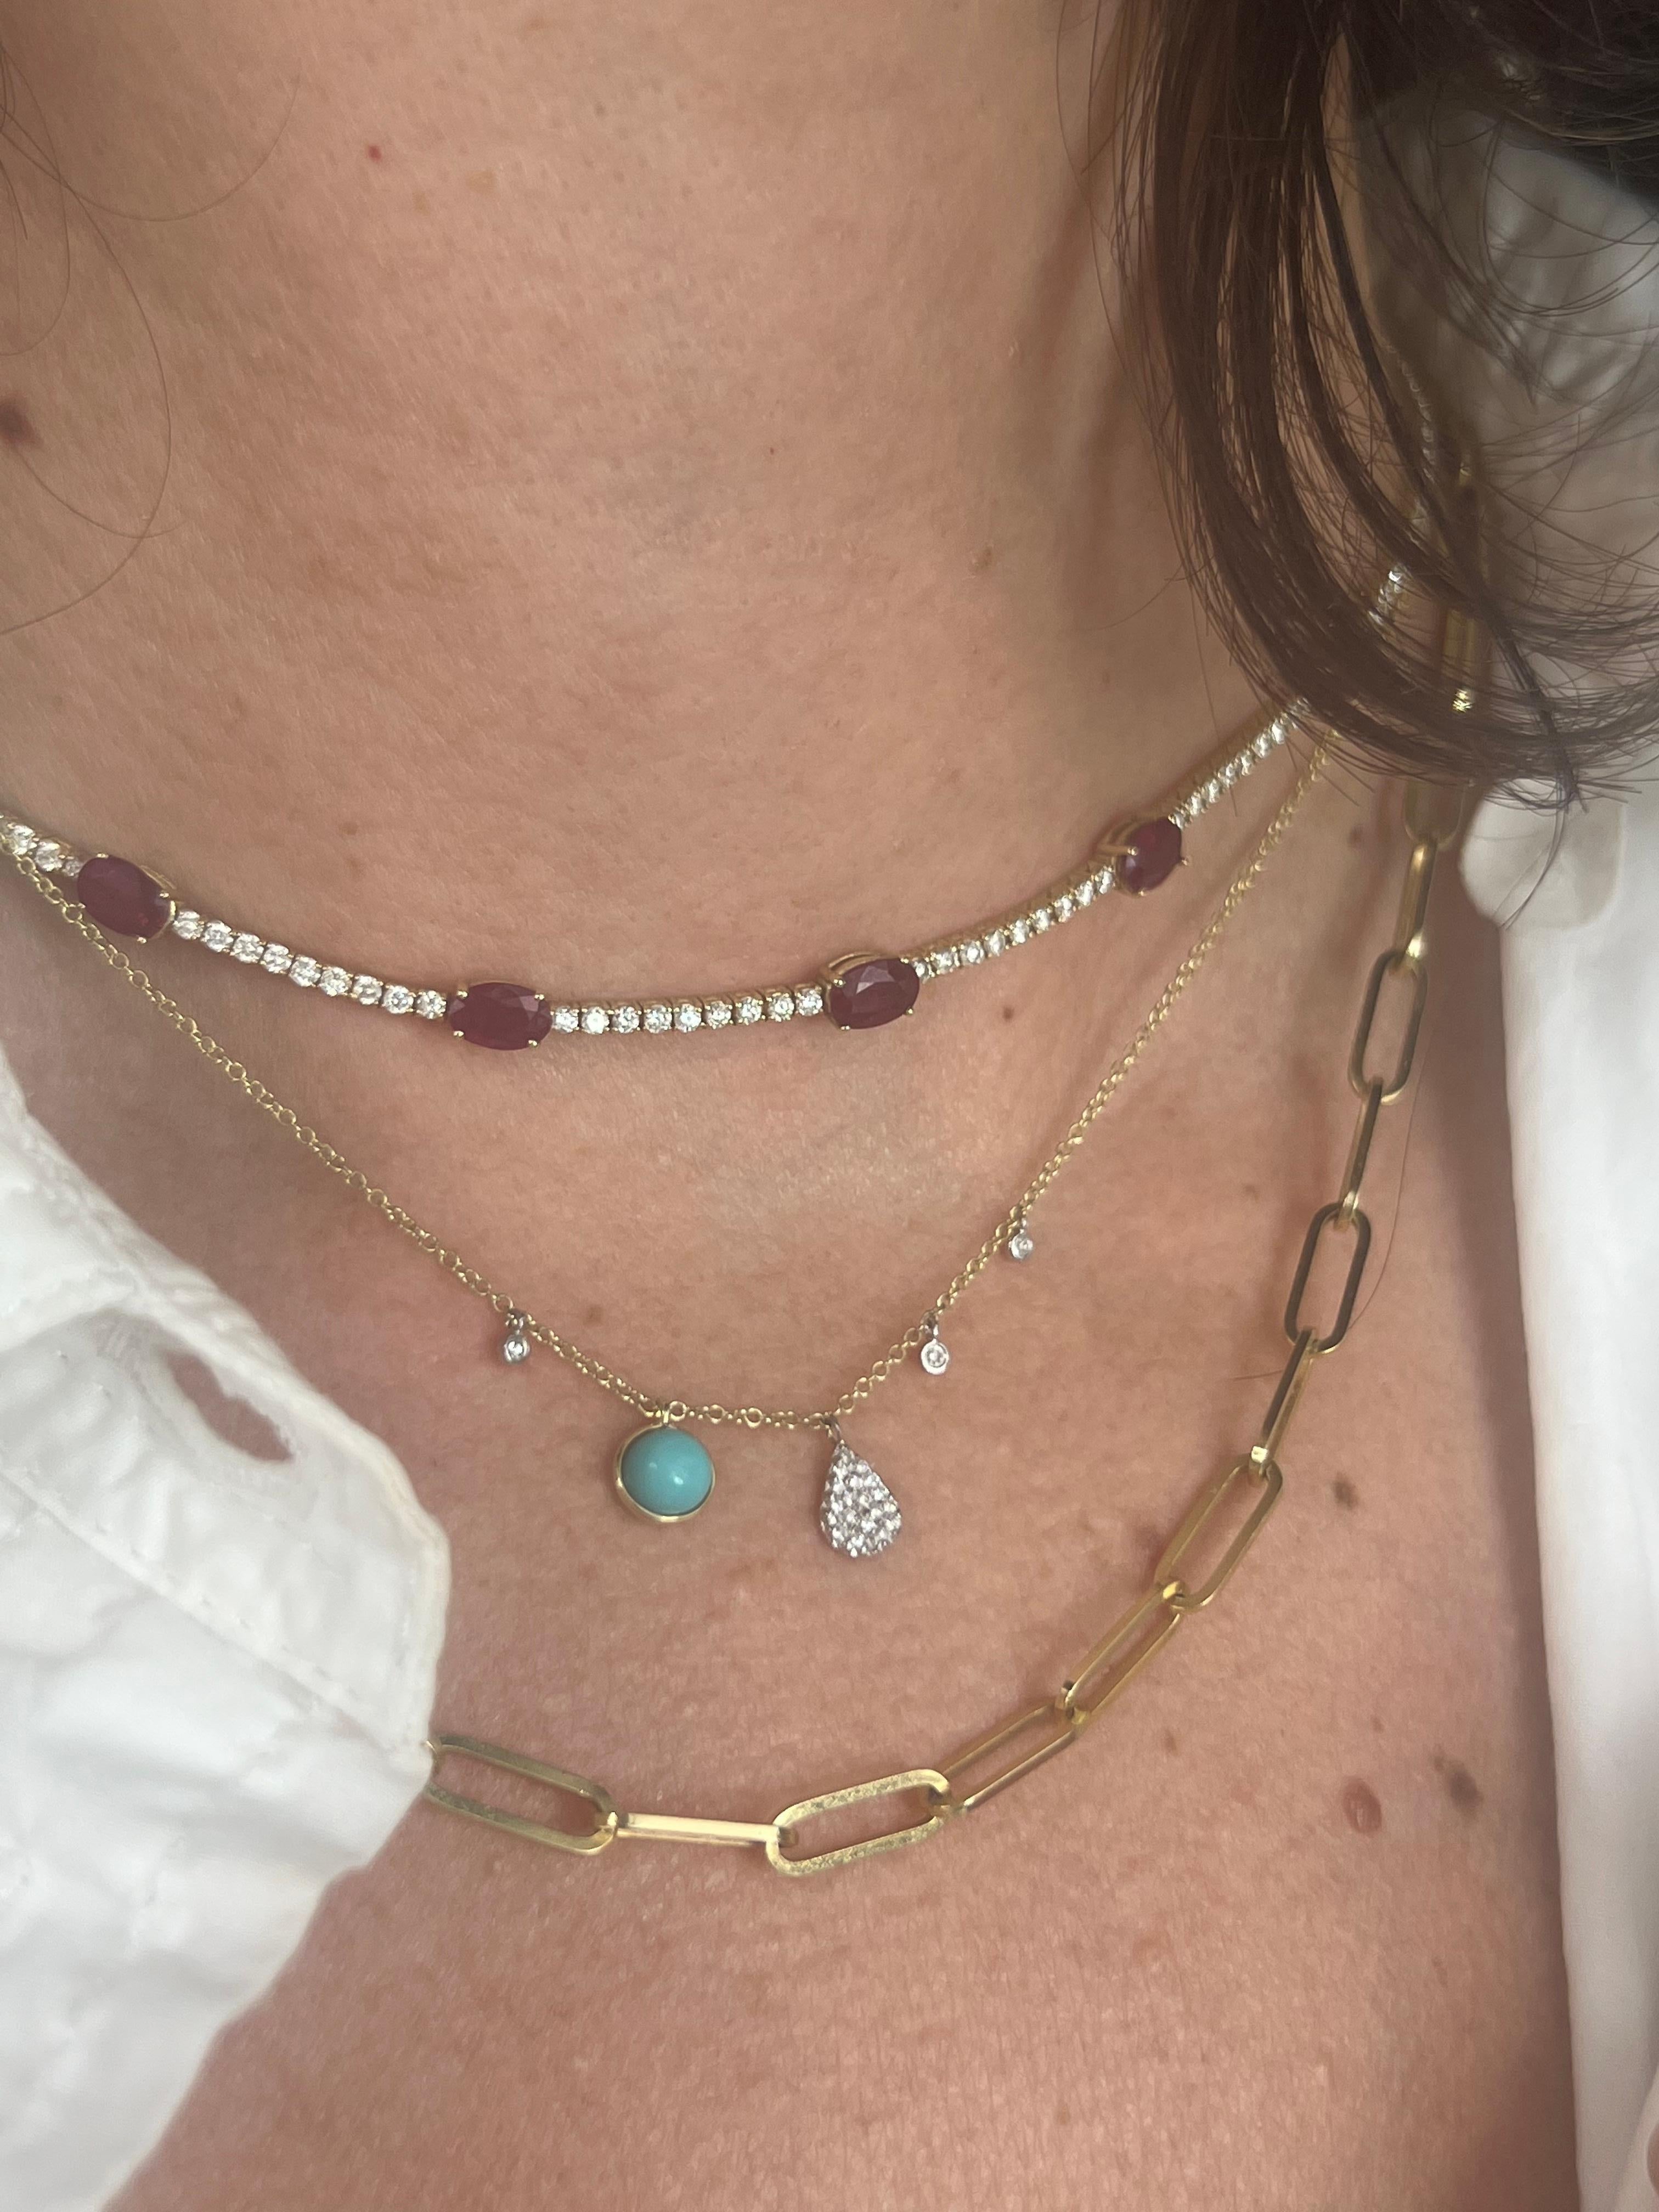 14K yellow gold turquoise and diamond pendant necklace. 

Meira T is a renowned jewelry designer who has been crafting exquisite pieces for over two decades. Her designs are inspired by her global travels, and her pieces are made with the finest